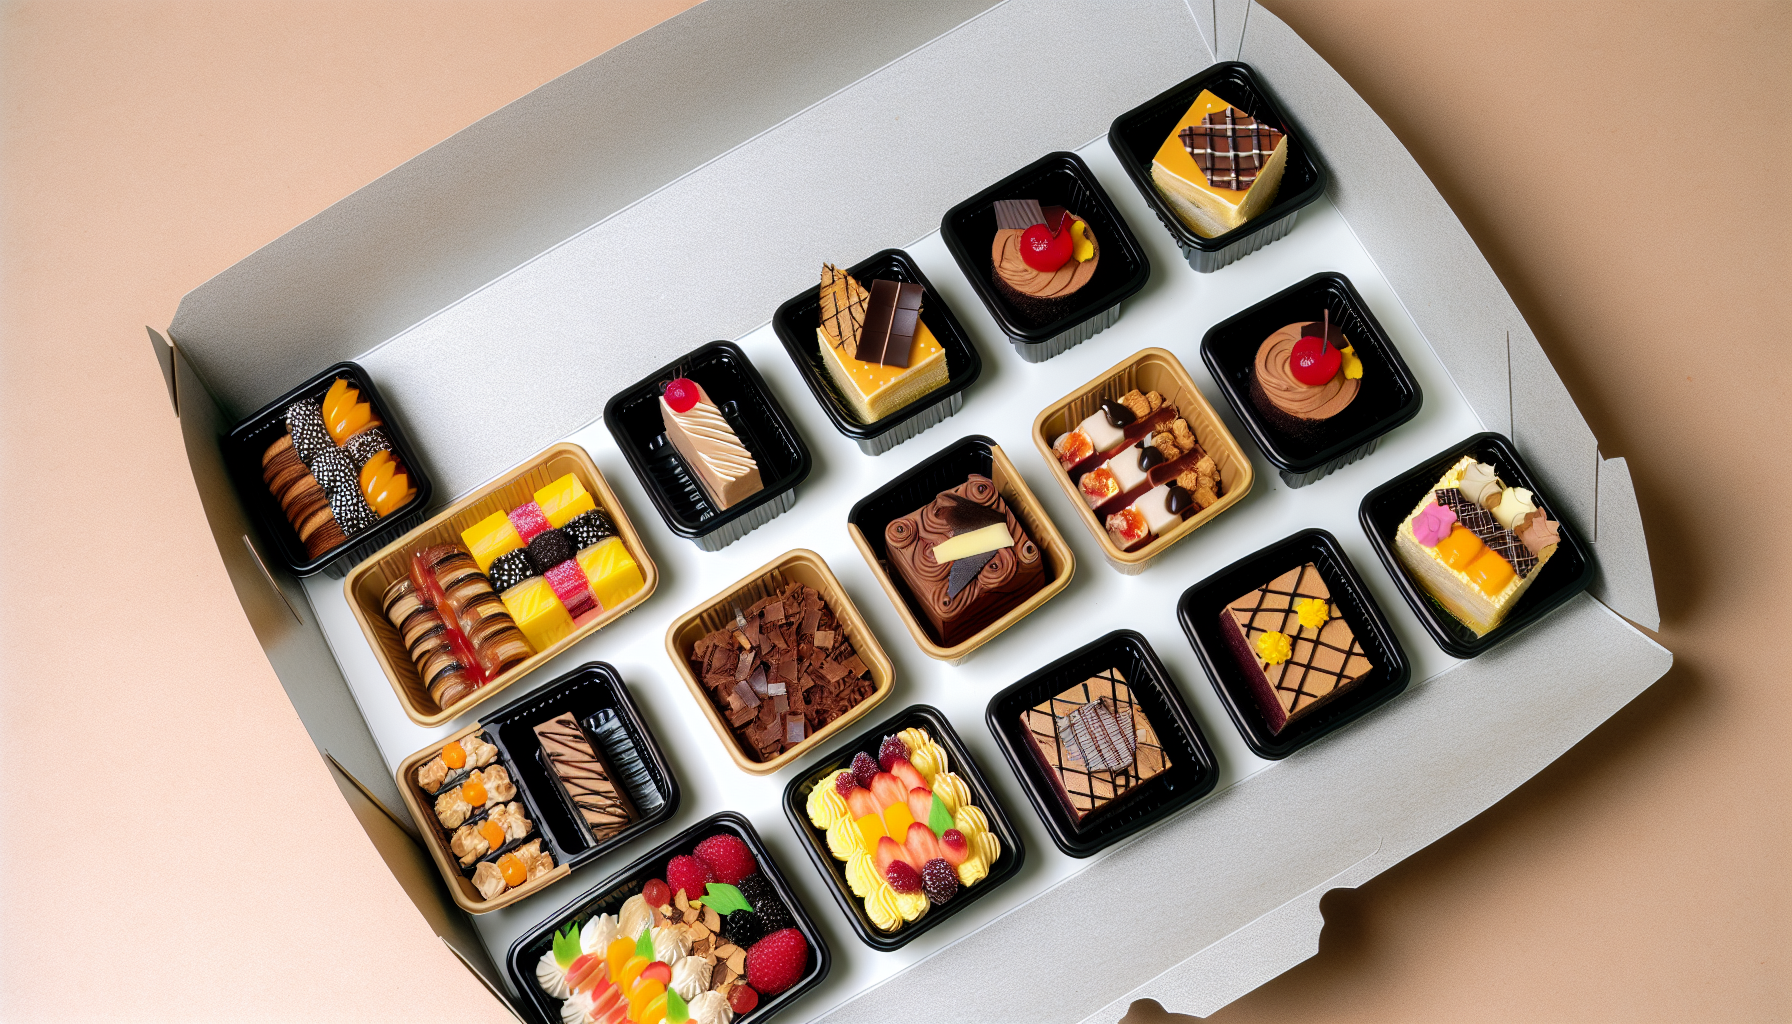 Assortment of beautifully decorated bento cakes in takeout containers